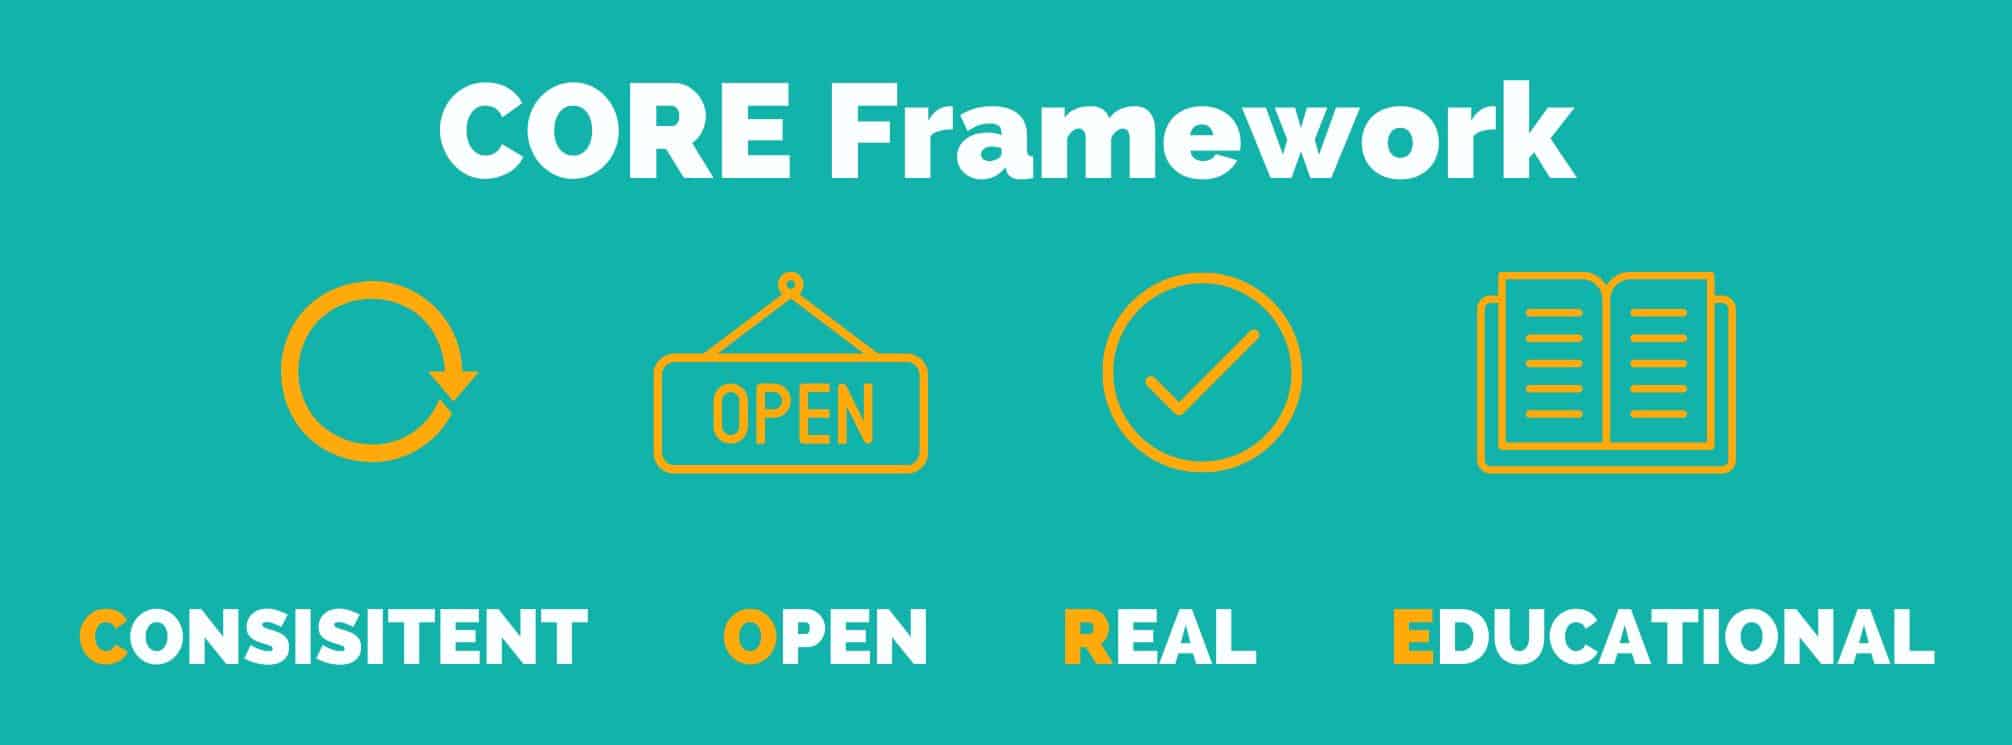 CORE Framework: consistent, open, real, and educational